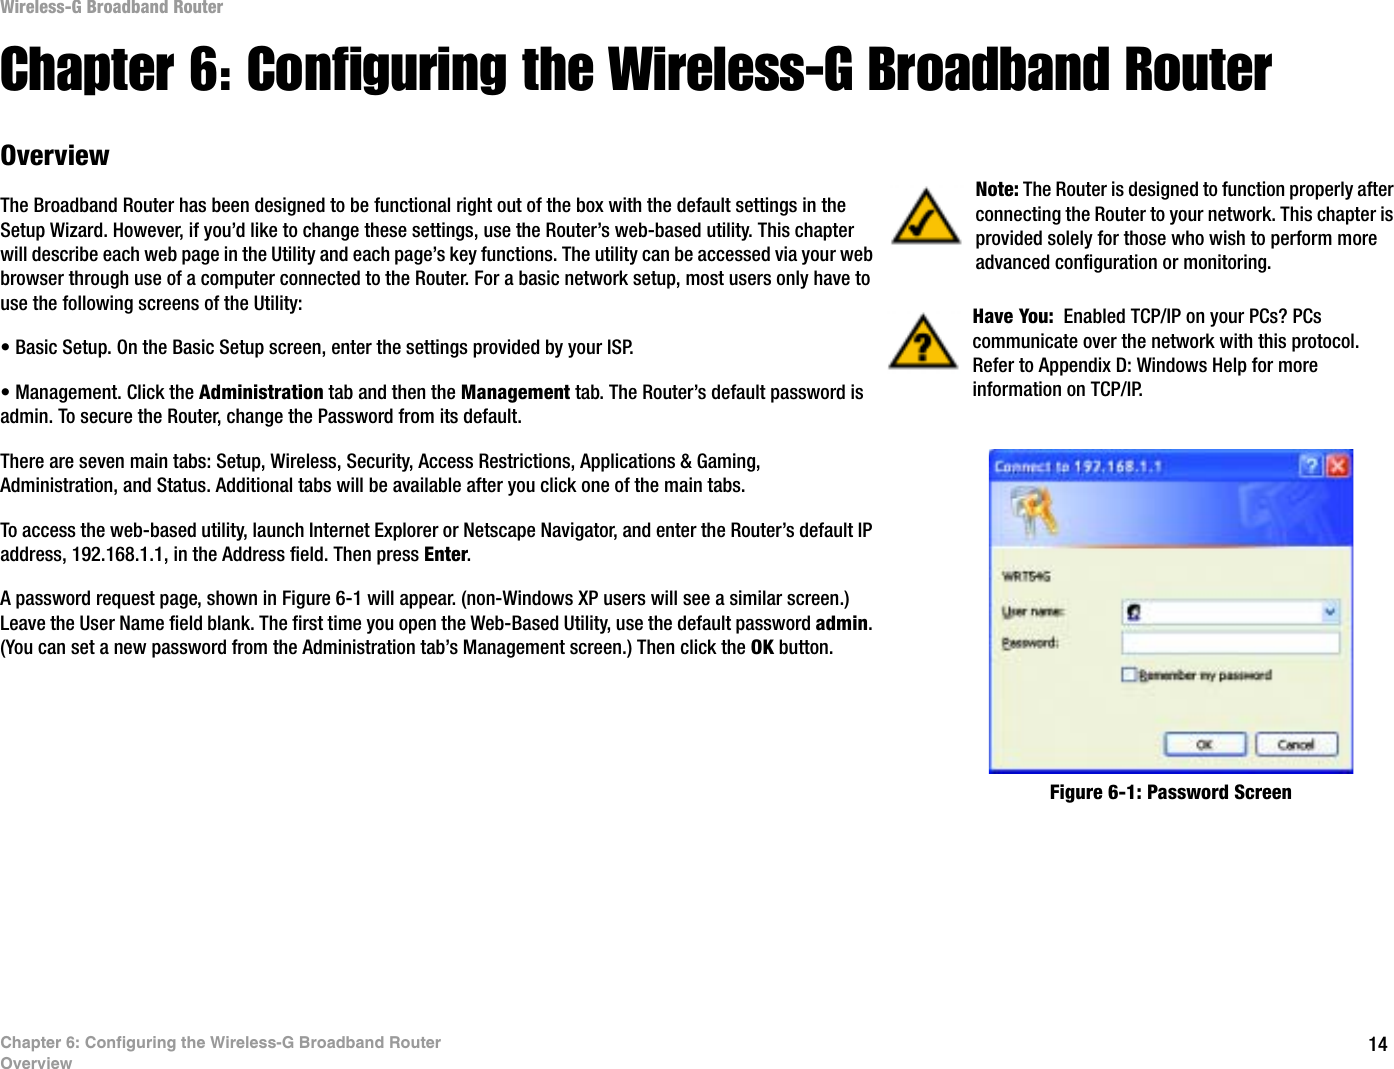 14Chapter 6: Configuring the Wireless-G Broadband RouterOverviewWireless-G Broadband RouterChapter 6: Configuring the Wireless-G Broadband RouterOverviewThe Broadband Router has been designed to be functional right out of the box with the default settings in the Setup Wizard. However, if you’d like to change these settings, use the Router’s web-based utility. This chapter will describe each web page in the Utility and each page’s key functions. The utility can be accessed via your web browser through use of a computer connected to the Router. For a basic network setup, most users only have to use the following screens of the Utility:• Basic Setup. On the Basic Setup screen, enter the settings provided by your ISP.• Management. Click the Administration tab and then the Management tab. The Router’s default password is admin. To secure the Router, change the Password from its default.There are seven main tabs: Setup, Wireless, Security, Access Restrictions, Applications &amp; Gaming, Administration, and Status. Additional tabs will be available after you click one of the main tabs.To access the web-based utility, launch Internet Explorer or Netscape Navigator, and enter the Router’s default IP address, 192.168.1.1, in the Address field. Then press Enter.A password request page, shown in Figure 6-1 will appear. (non-Windows XP users will see a similar screen.) Leave the User Name field blank. The first time you open the Web-Based Utility, use the default password admin.(You can set a new password from the Administration tab’s Management screen.) Then click the OK button. Have You:  Enabled TCP/IP on your PCs? PCs communicate over the network with this protocol. Refer to Appendix D: Windows Help for more information on TCP/IP.Note: The Router is designed to function properly after connecting the Router to your network. This chapter is provided solely for those who wish to perform more advanced configuration or monitoring.Figure 6-1: Password Screen